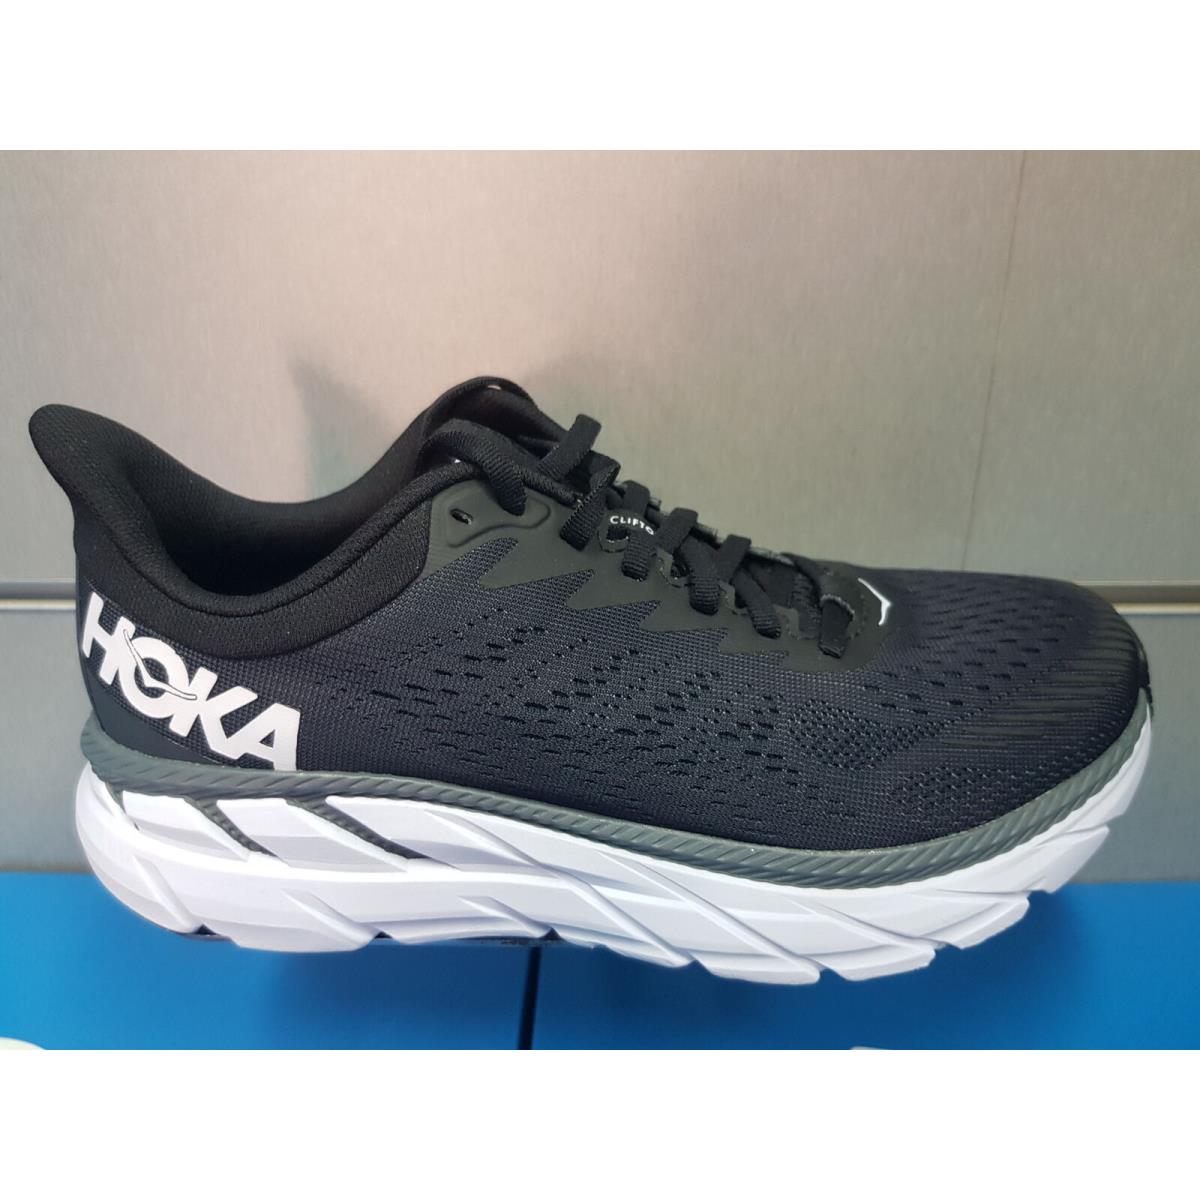 Hoka One One Clifton 7 Wide 2E 1110534/BWHT Black/white Mens Running Shoes